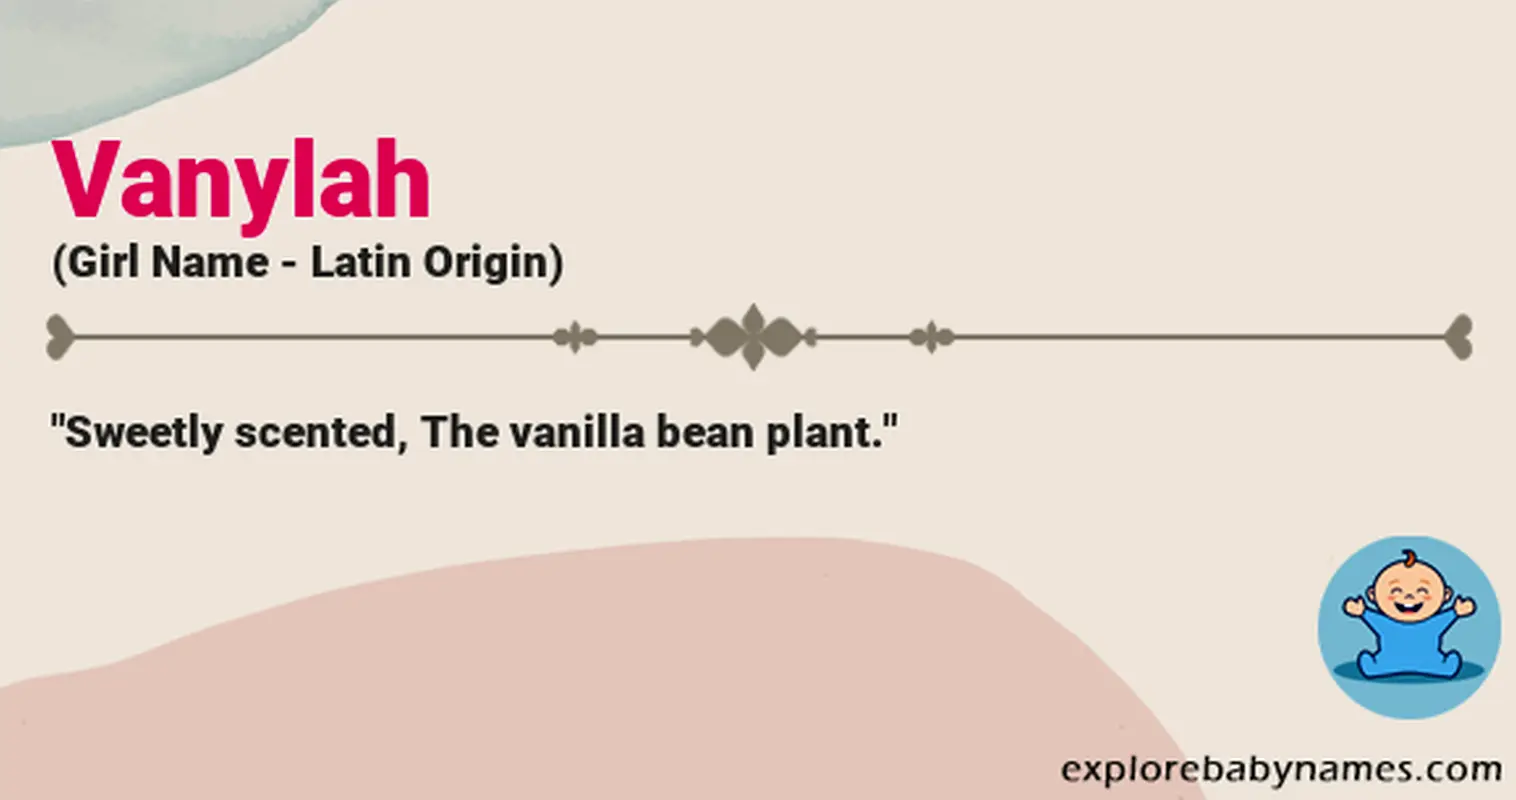 Meaning of Vanylah